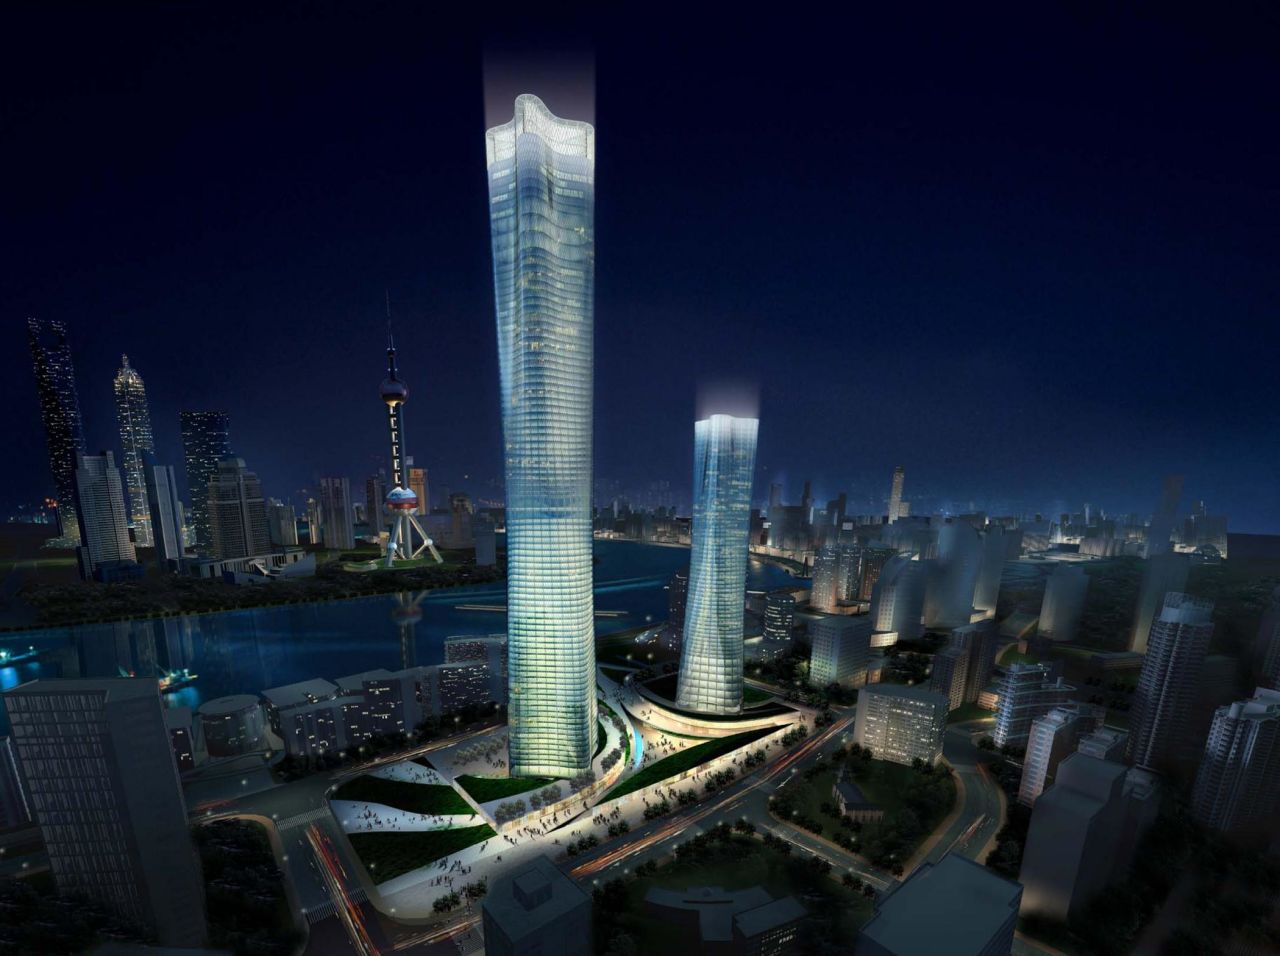 <strong>W Shanghai </strong><br /><strong>Status: </strong>Opened 2015<br /><strong>Rooms: </strong>600 <br /><strong>Fast fact:</strong> The W Shanghai will tower over The Bund, a hip waterfront neighborhood filled with bars and restaurants on the Huangpu River. <br /><a href="http://www.starwoodhotels.com/whotels/property/overview/index.html?propertyID=3360" target="_blank" target="_blank"><em>W Shanghai</em></a><em>, Block1 , Neighborhood 405,Tilanqiao Street Community Shanghai</em>